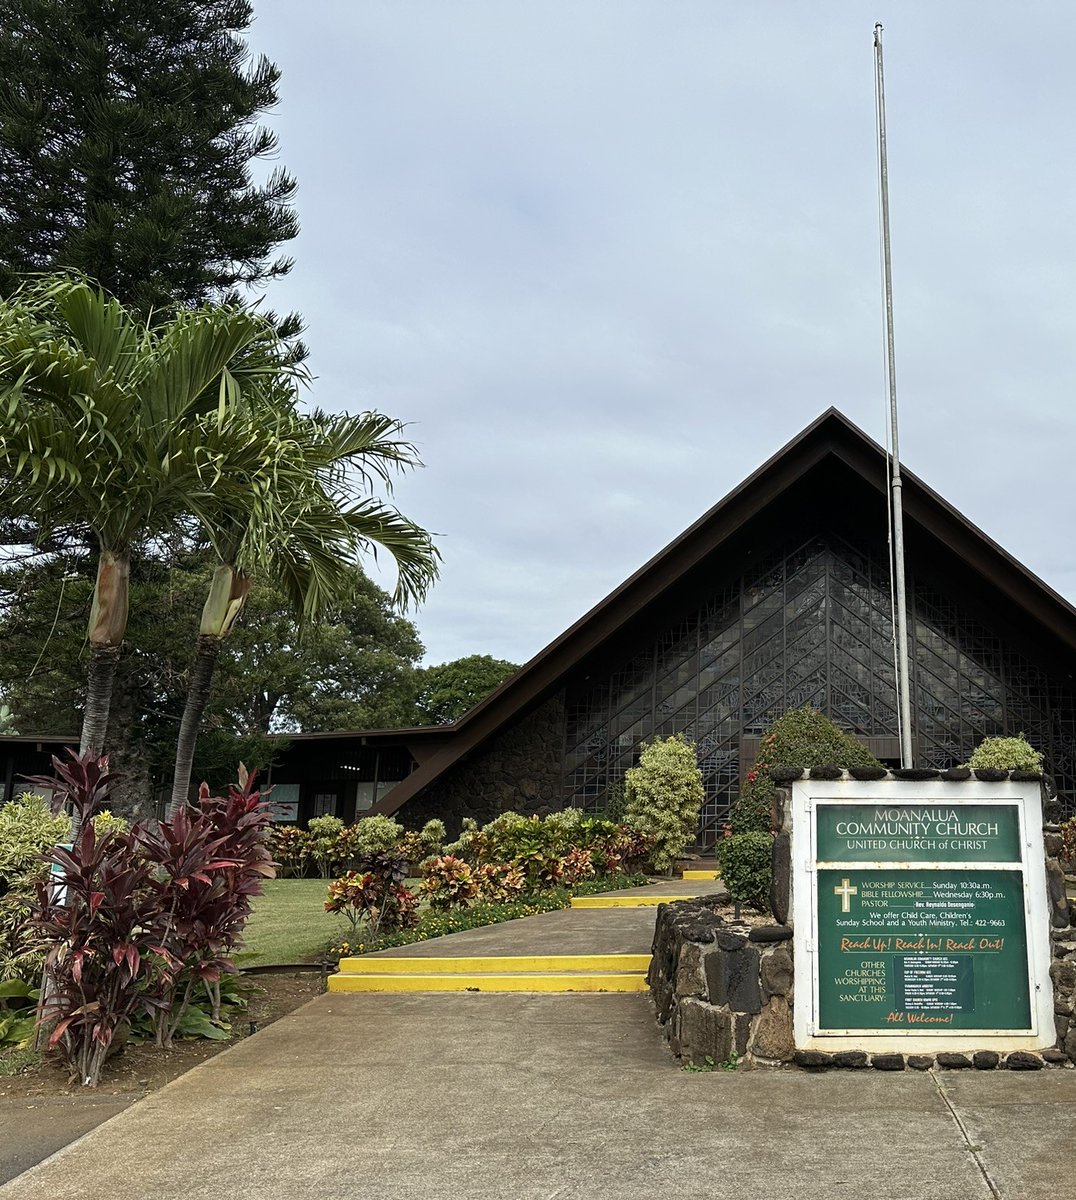 The Moanalua Community Church, built in 1957, is known for its memorial stained-glass window. Designed by John Wallis, the Memorial Window is the largest and most intact example of a 'continuous' stained glass window in Hawai'i. #midcenturymodernarchitecture #hawaiimodernism